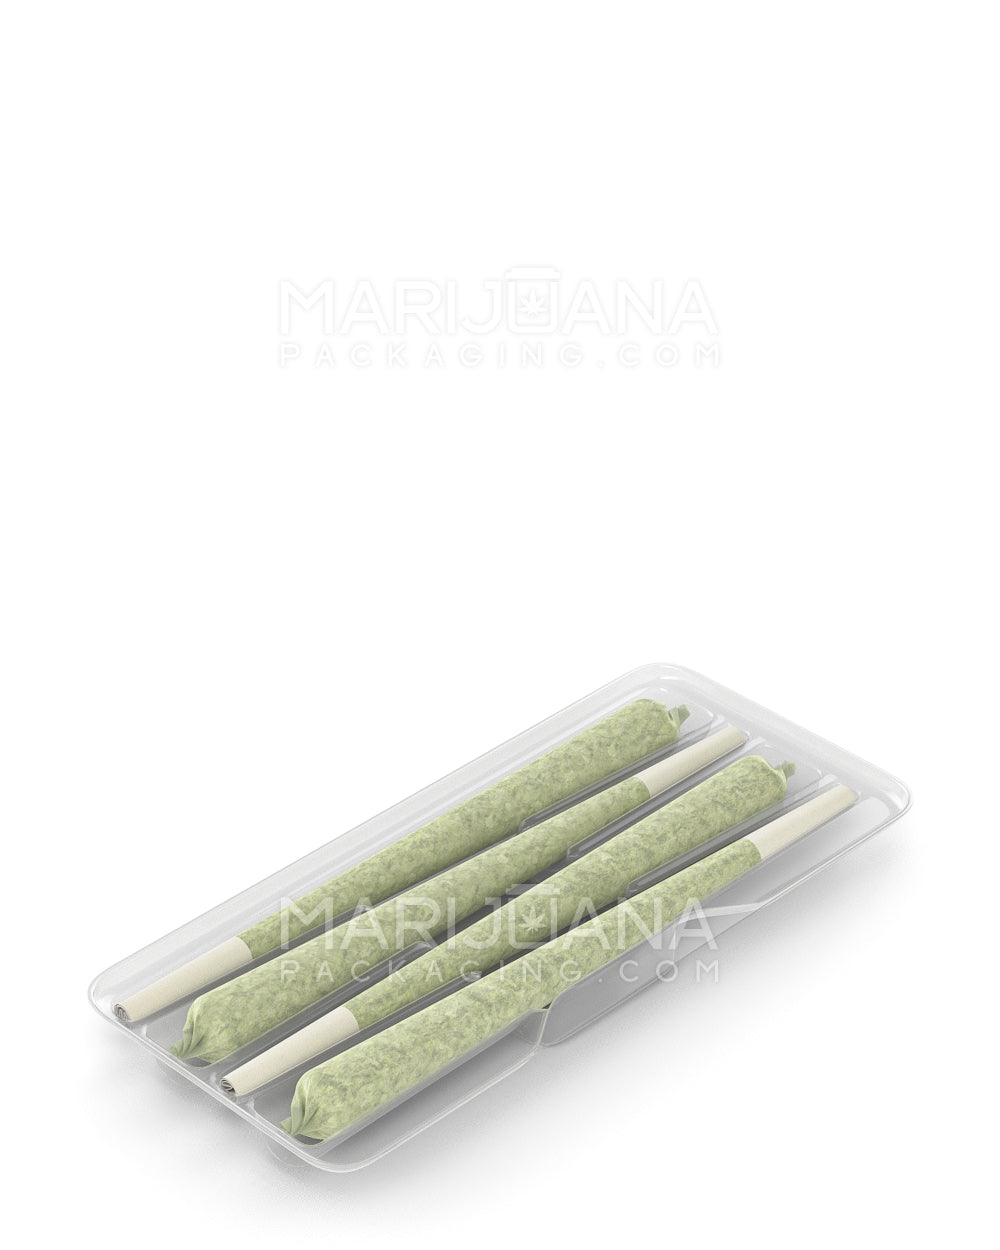 Edible & Joint Box Insert Tray for 4 King Size Pre Rolled Cones | 109mm - Clear Plastic - 100 Count - 2